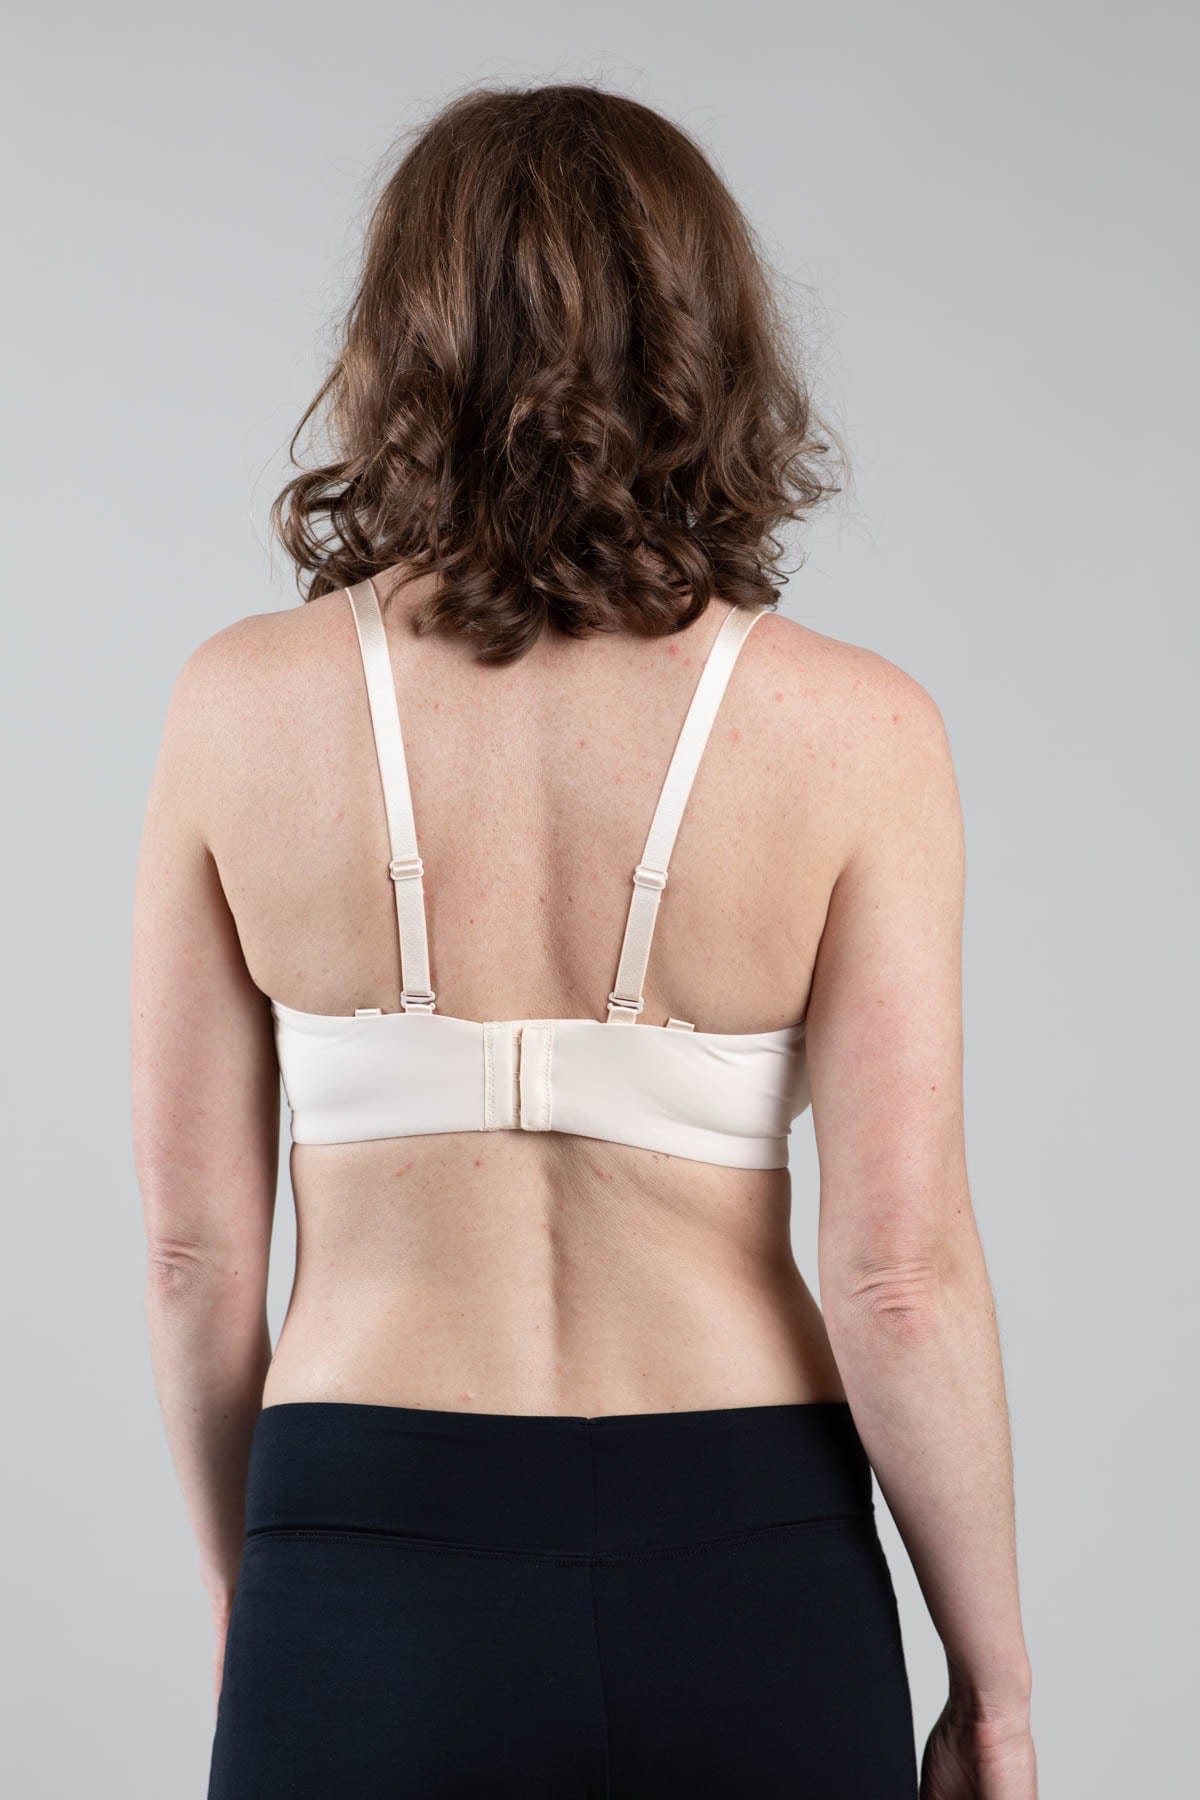 Shyaway on X: Keep an eye out for the best Nursing bra for hassle